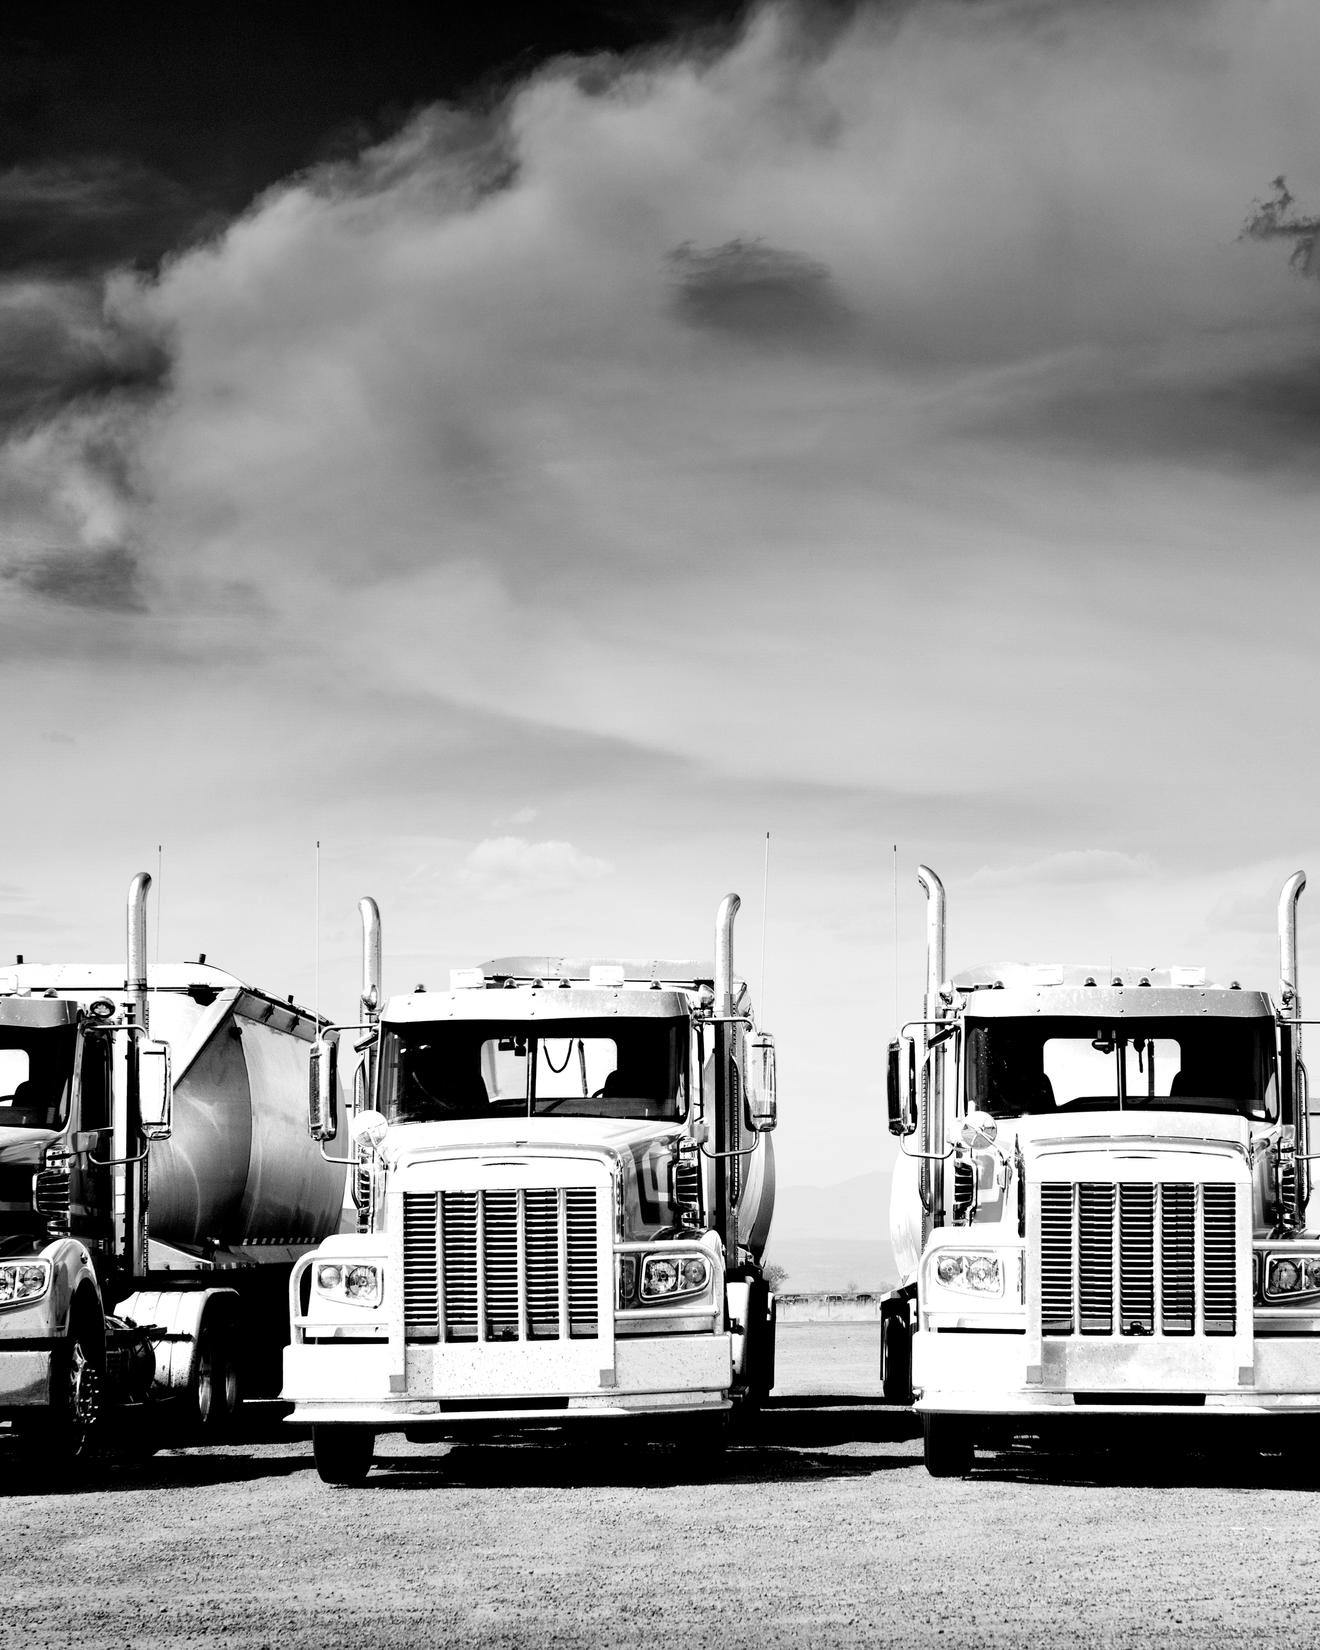 Large trucks at a stop in the United States of America